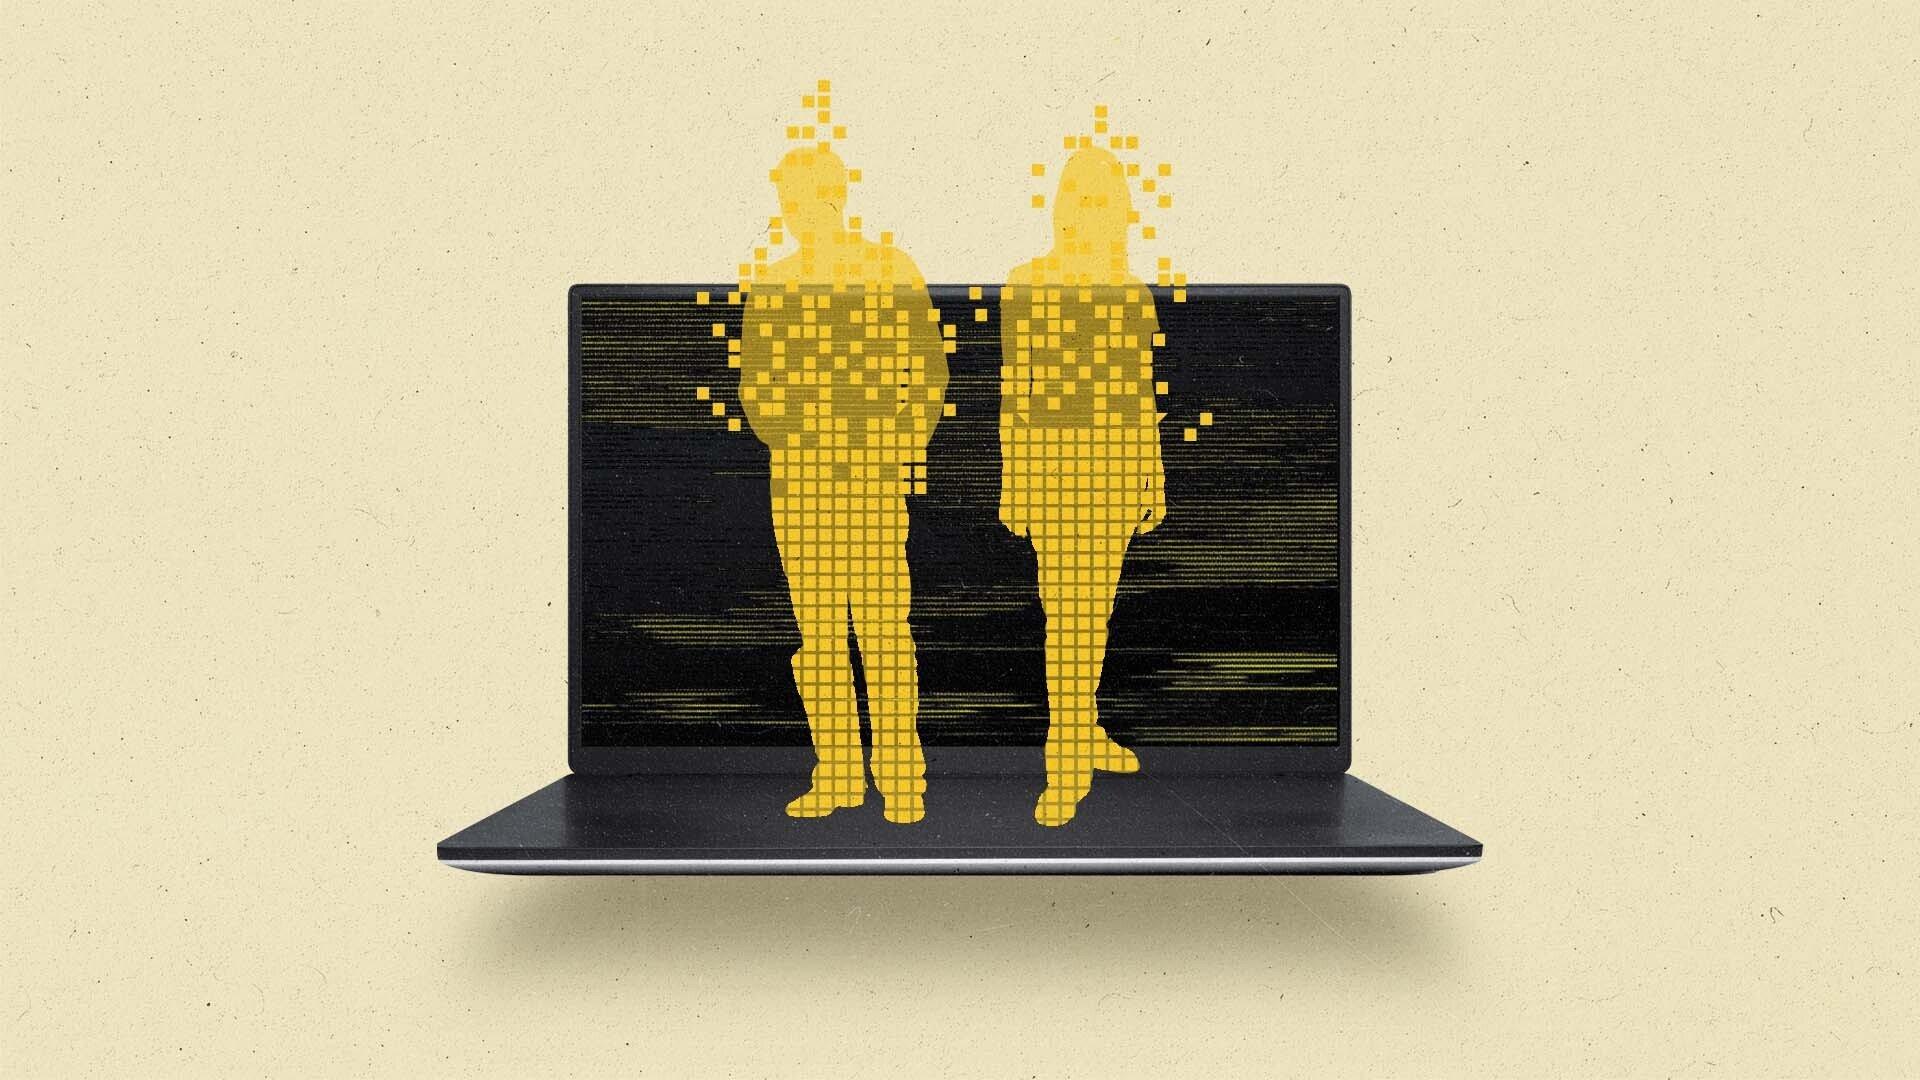 A man and a woman are rendered out of pixels on top of a laptop.